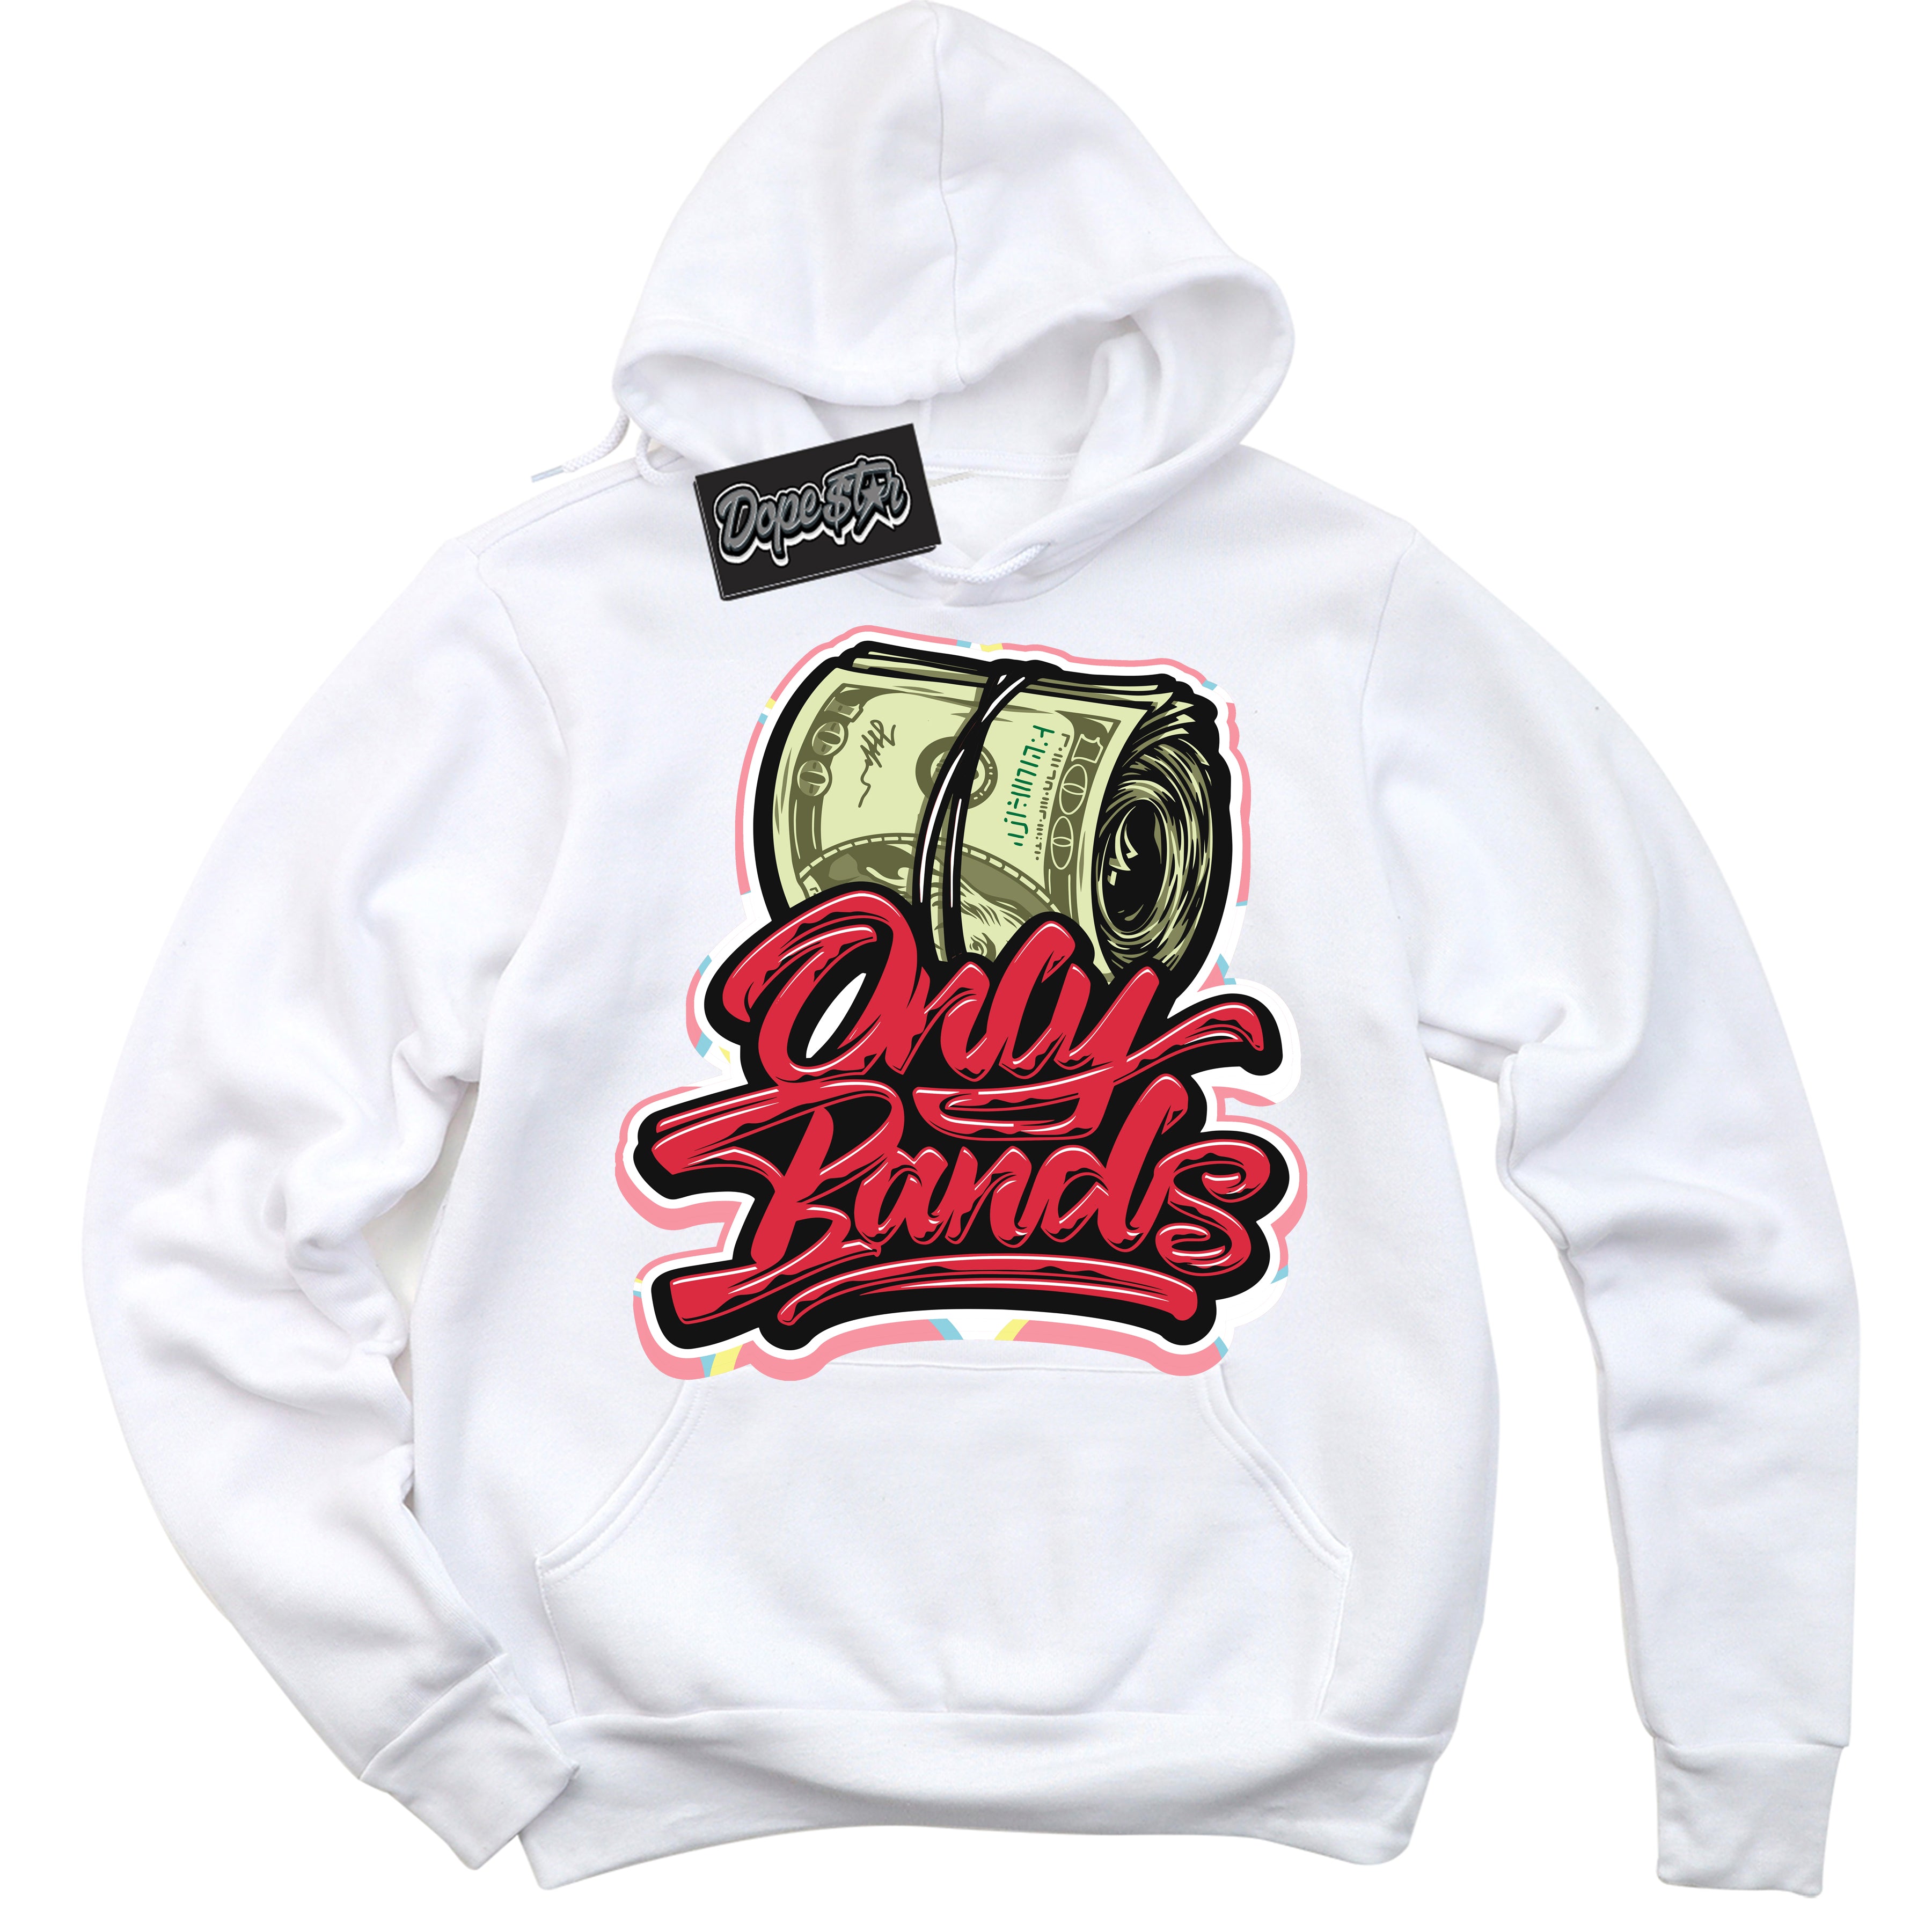 Cool White Graphic DopeStar Hoodie with “ Only Bands “ print, that perfectly matches Spider-Verse 1s sneakers